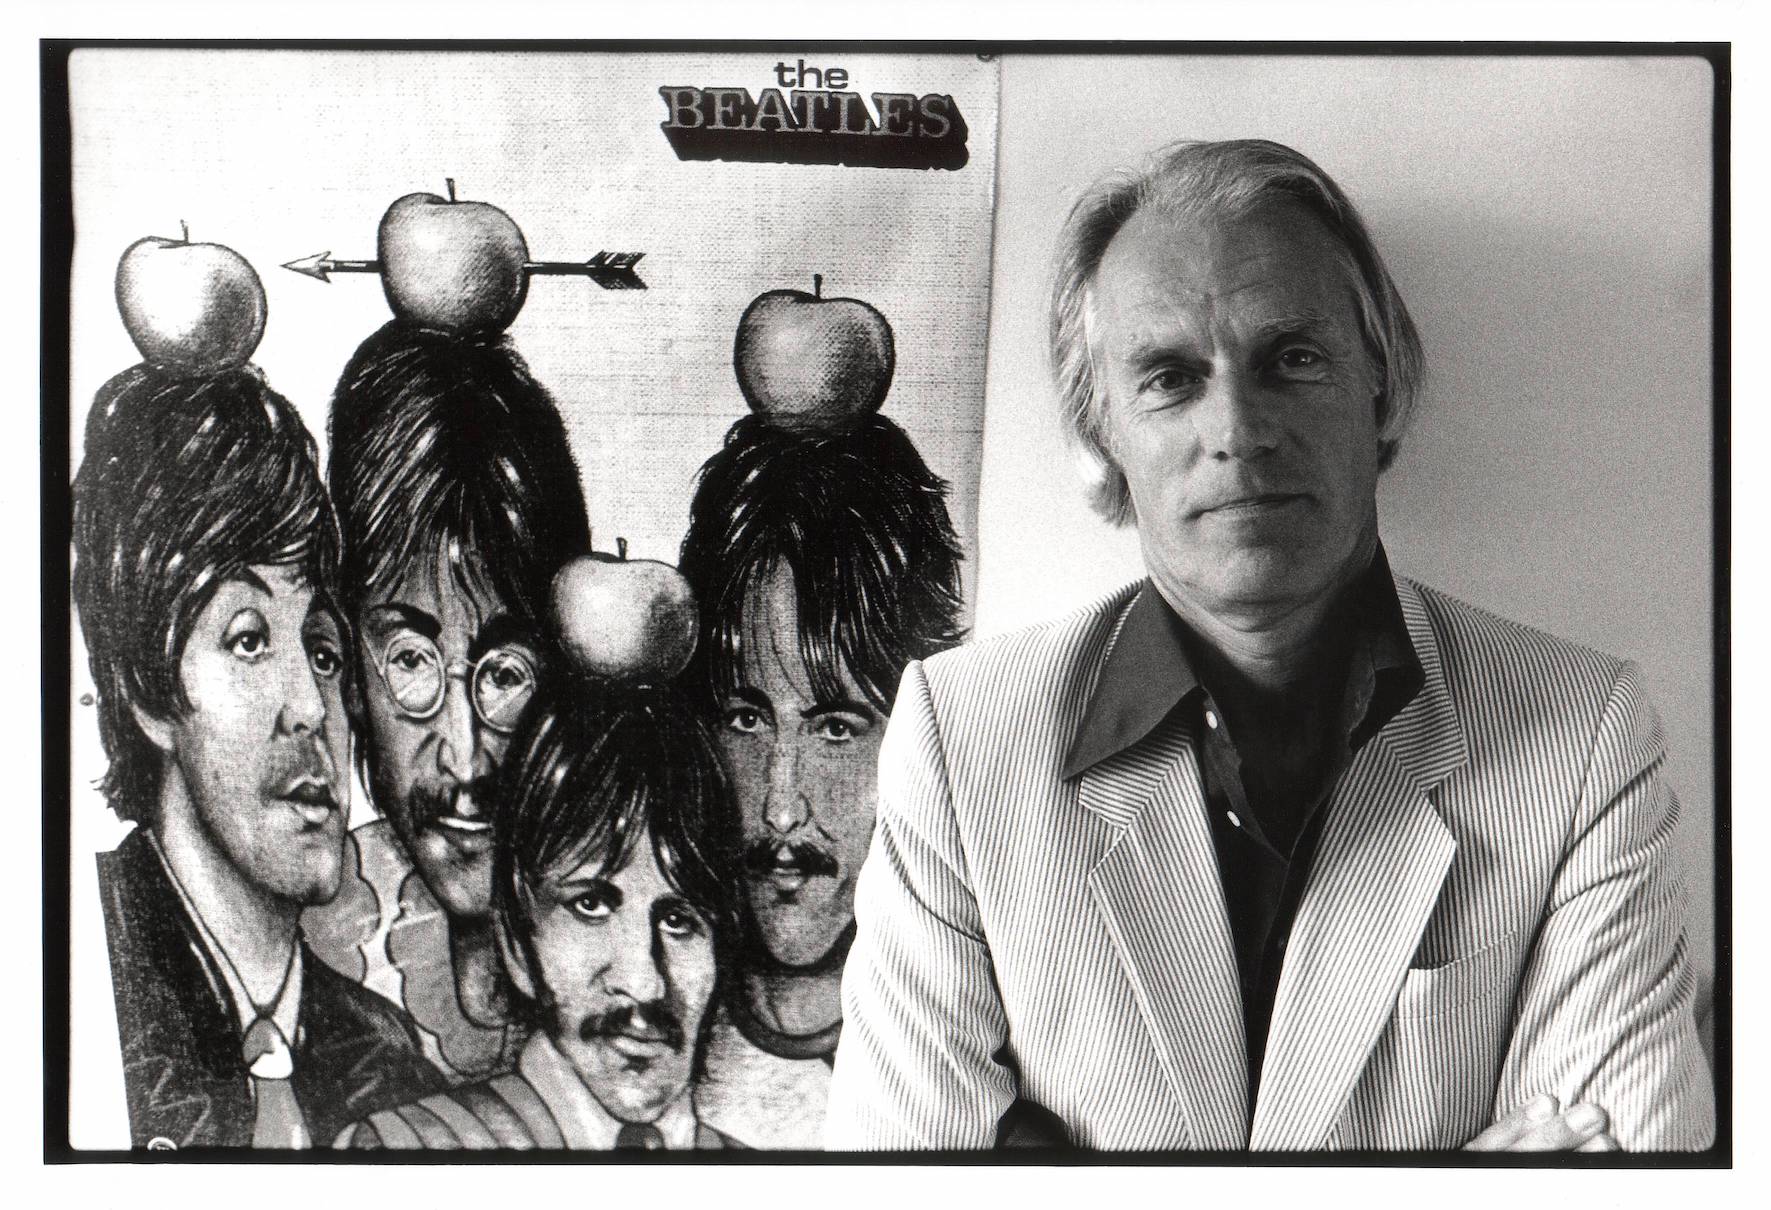 Producer George Martin in front of a poster of The Beatles